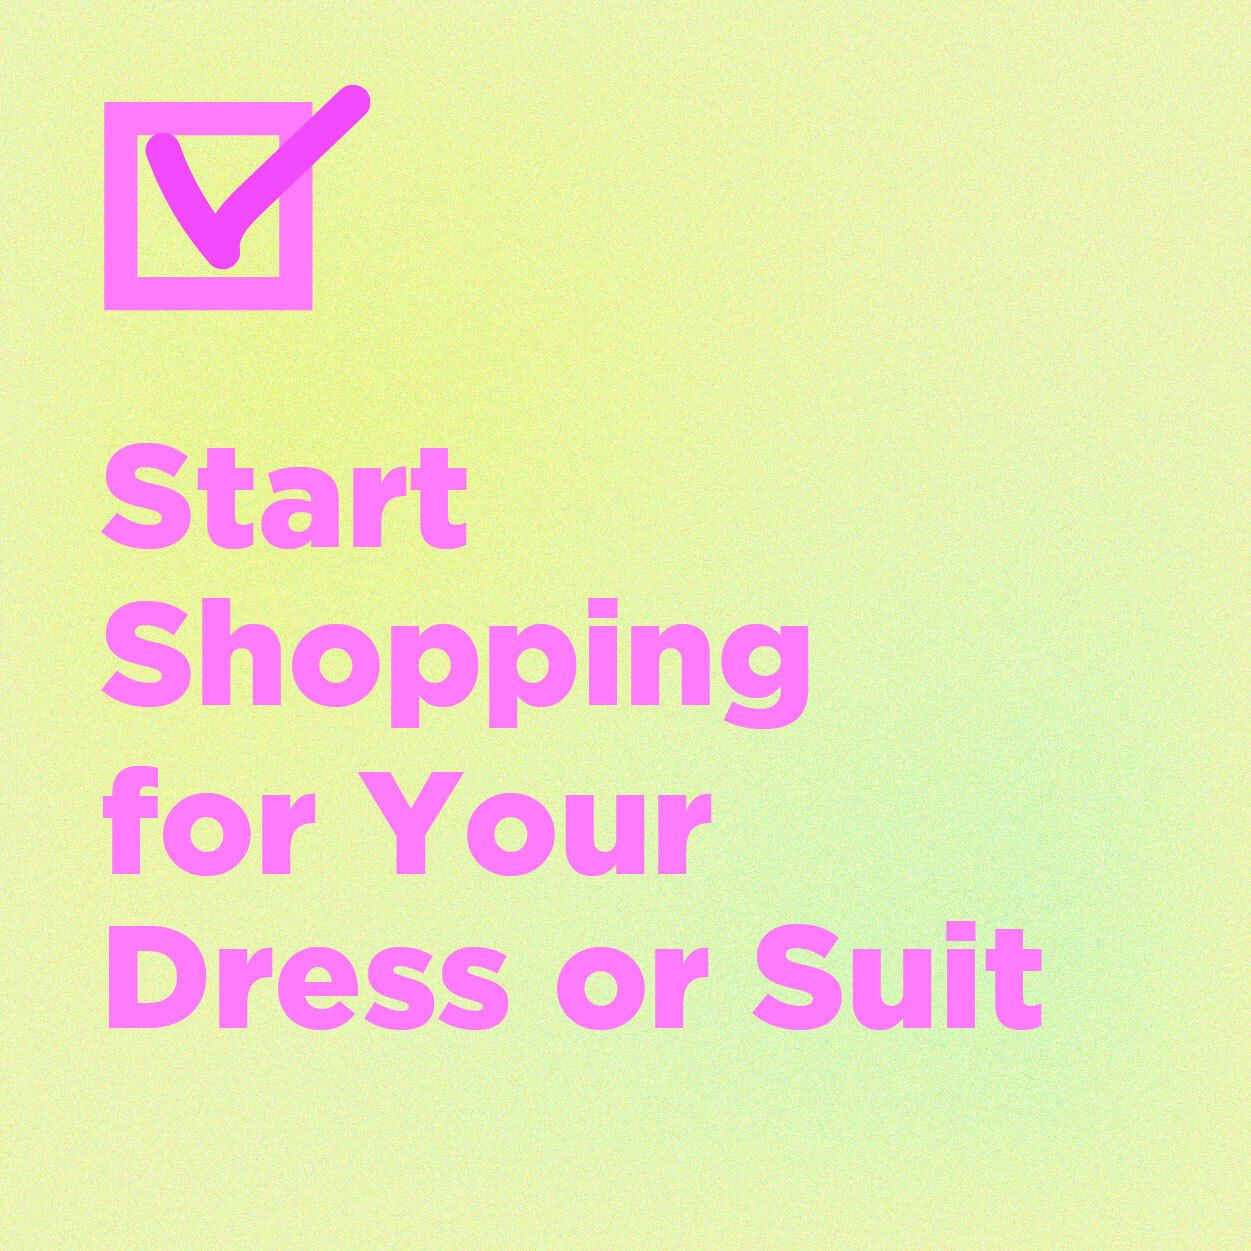 start shopping for your dress or suit